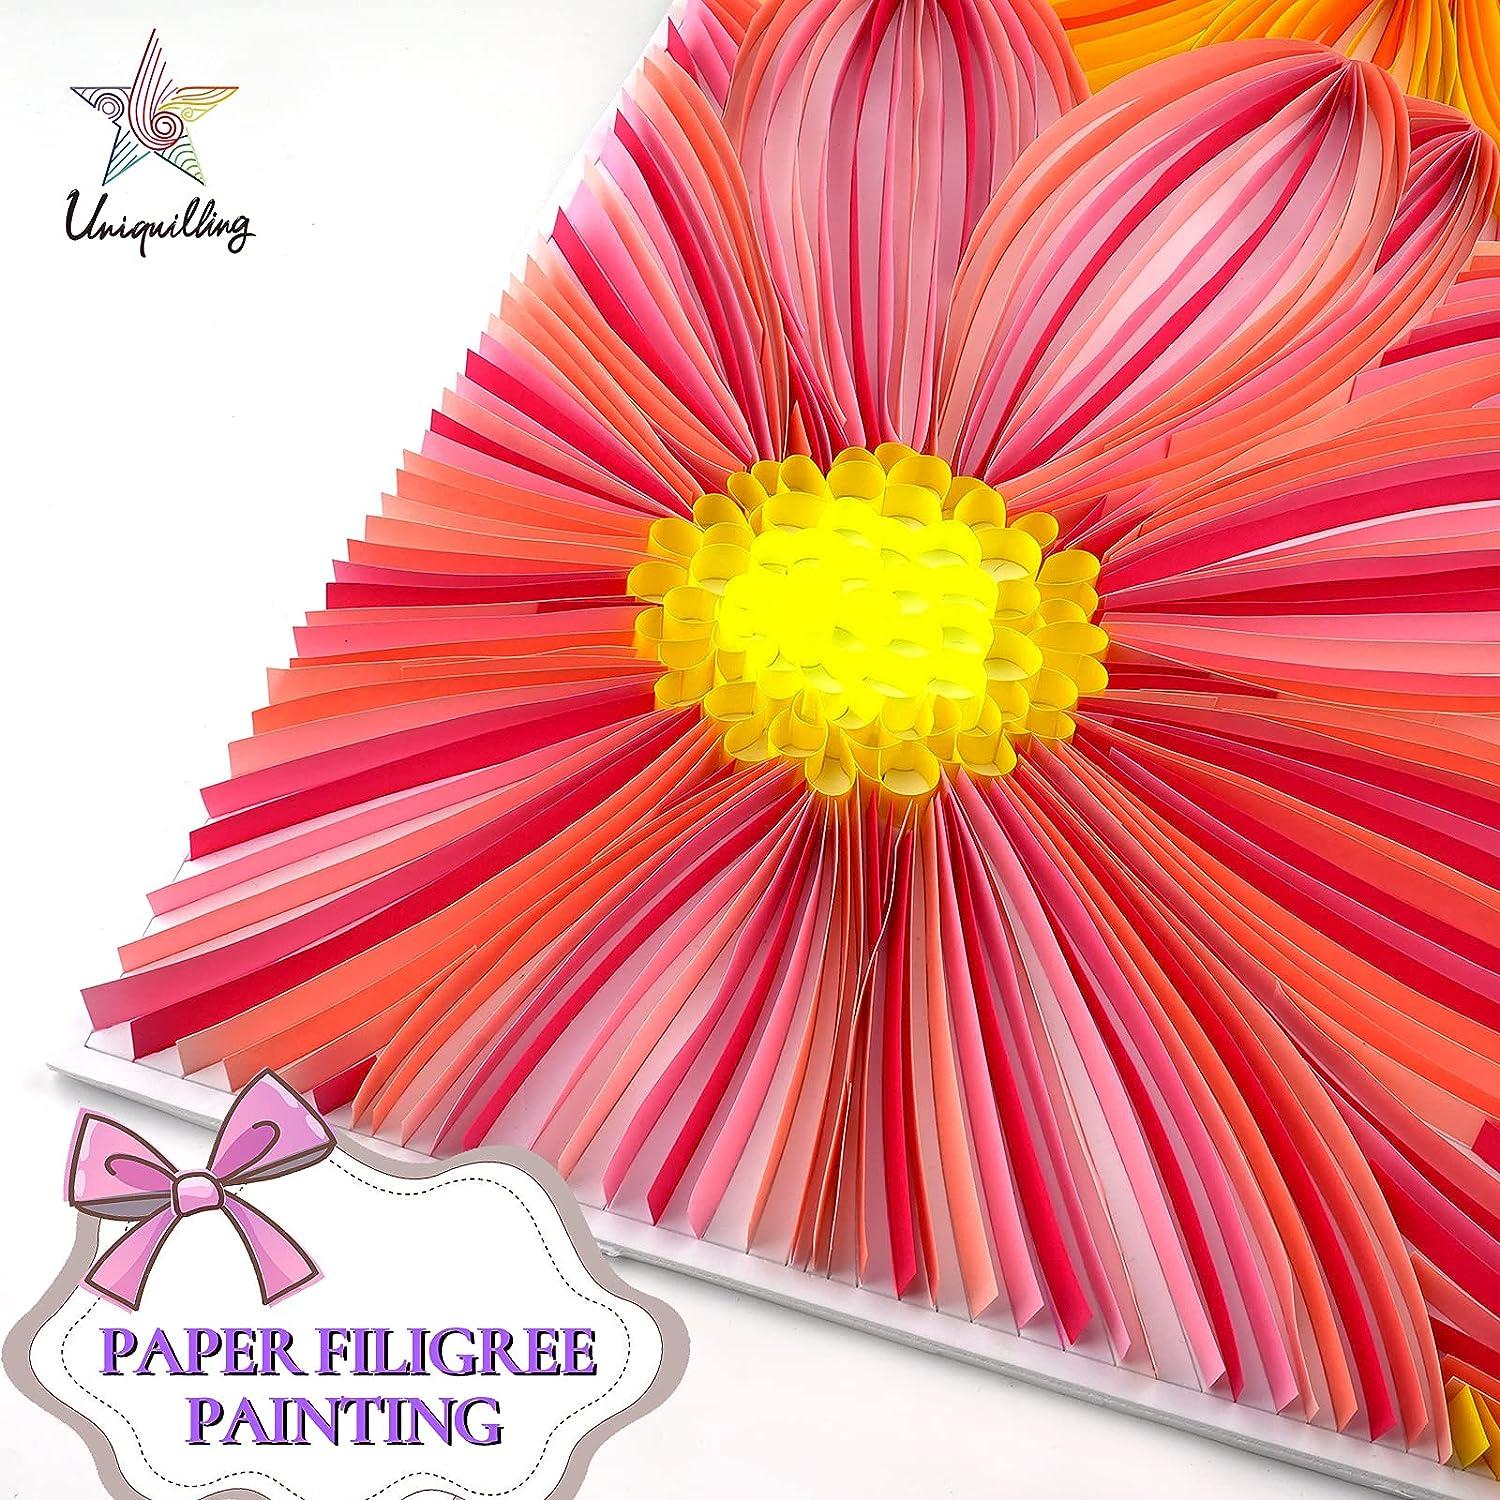 Wholesale quilling patterns flowers To Turn Your Imagination Into Reality 